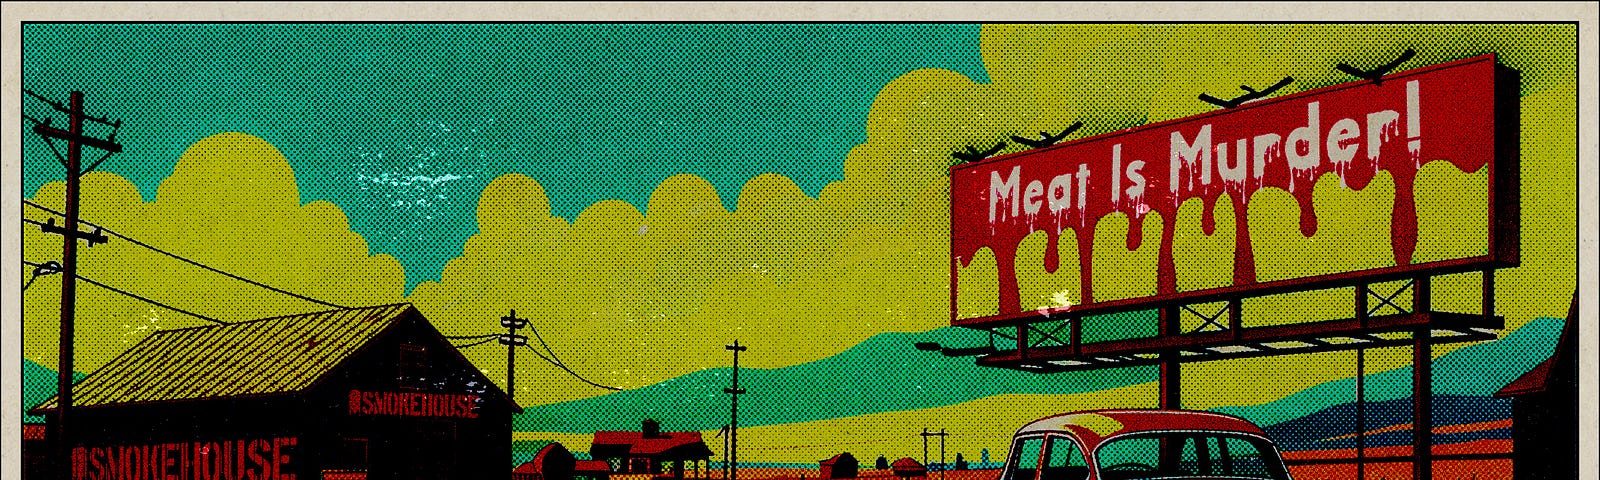 Meat is murder sign across highway from a smokehouse